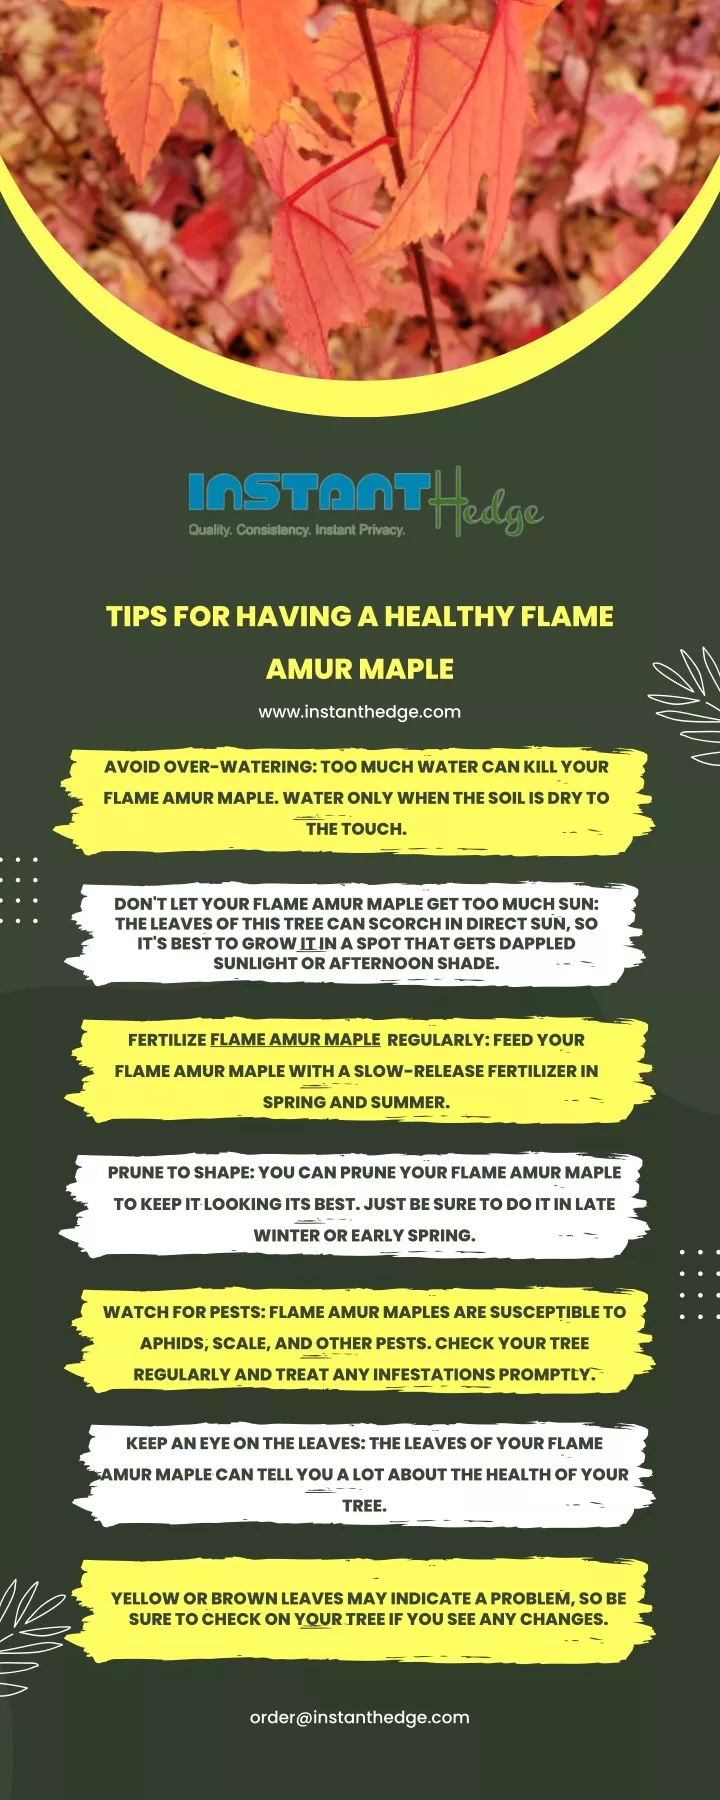 tips for having a healthy flame amur maple